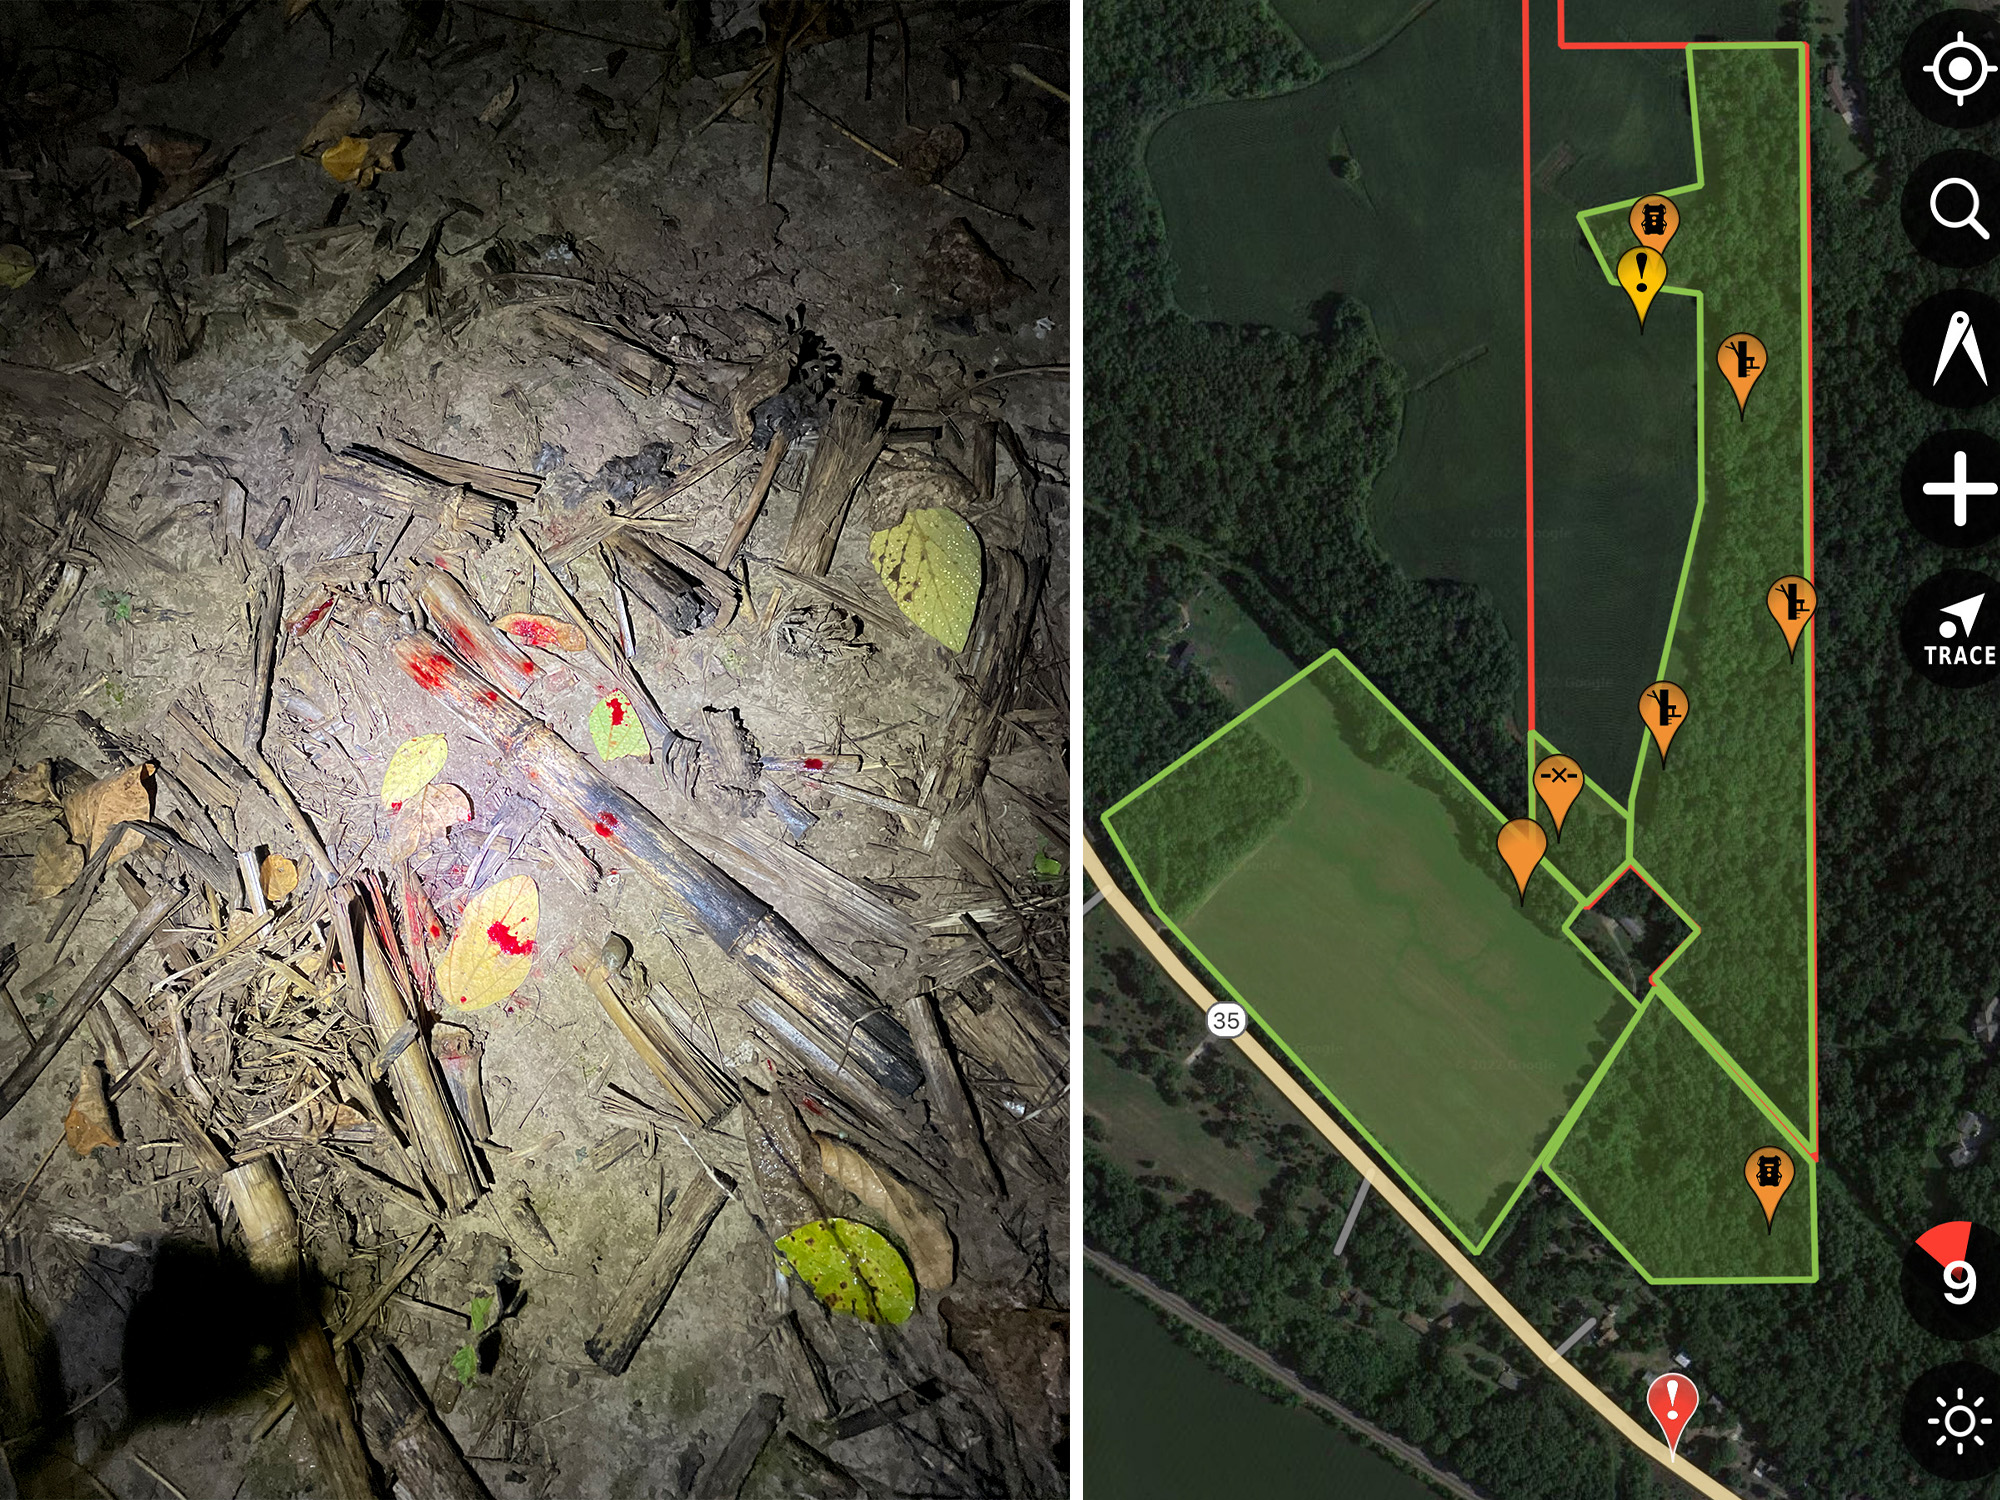 Left: the small amount of blood that Dahlke found. Right: Map showing where Dahlke shot the buck (yellow exclamation point) and where he found the buck on the side of the road (red exclamation point).